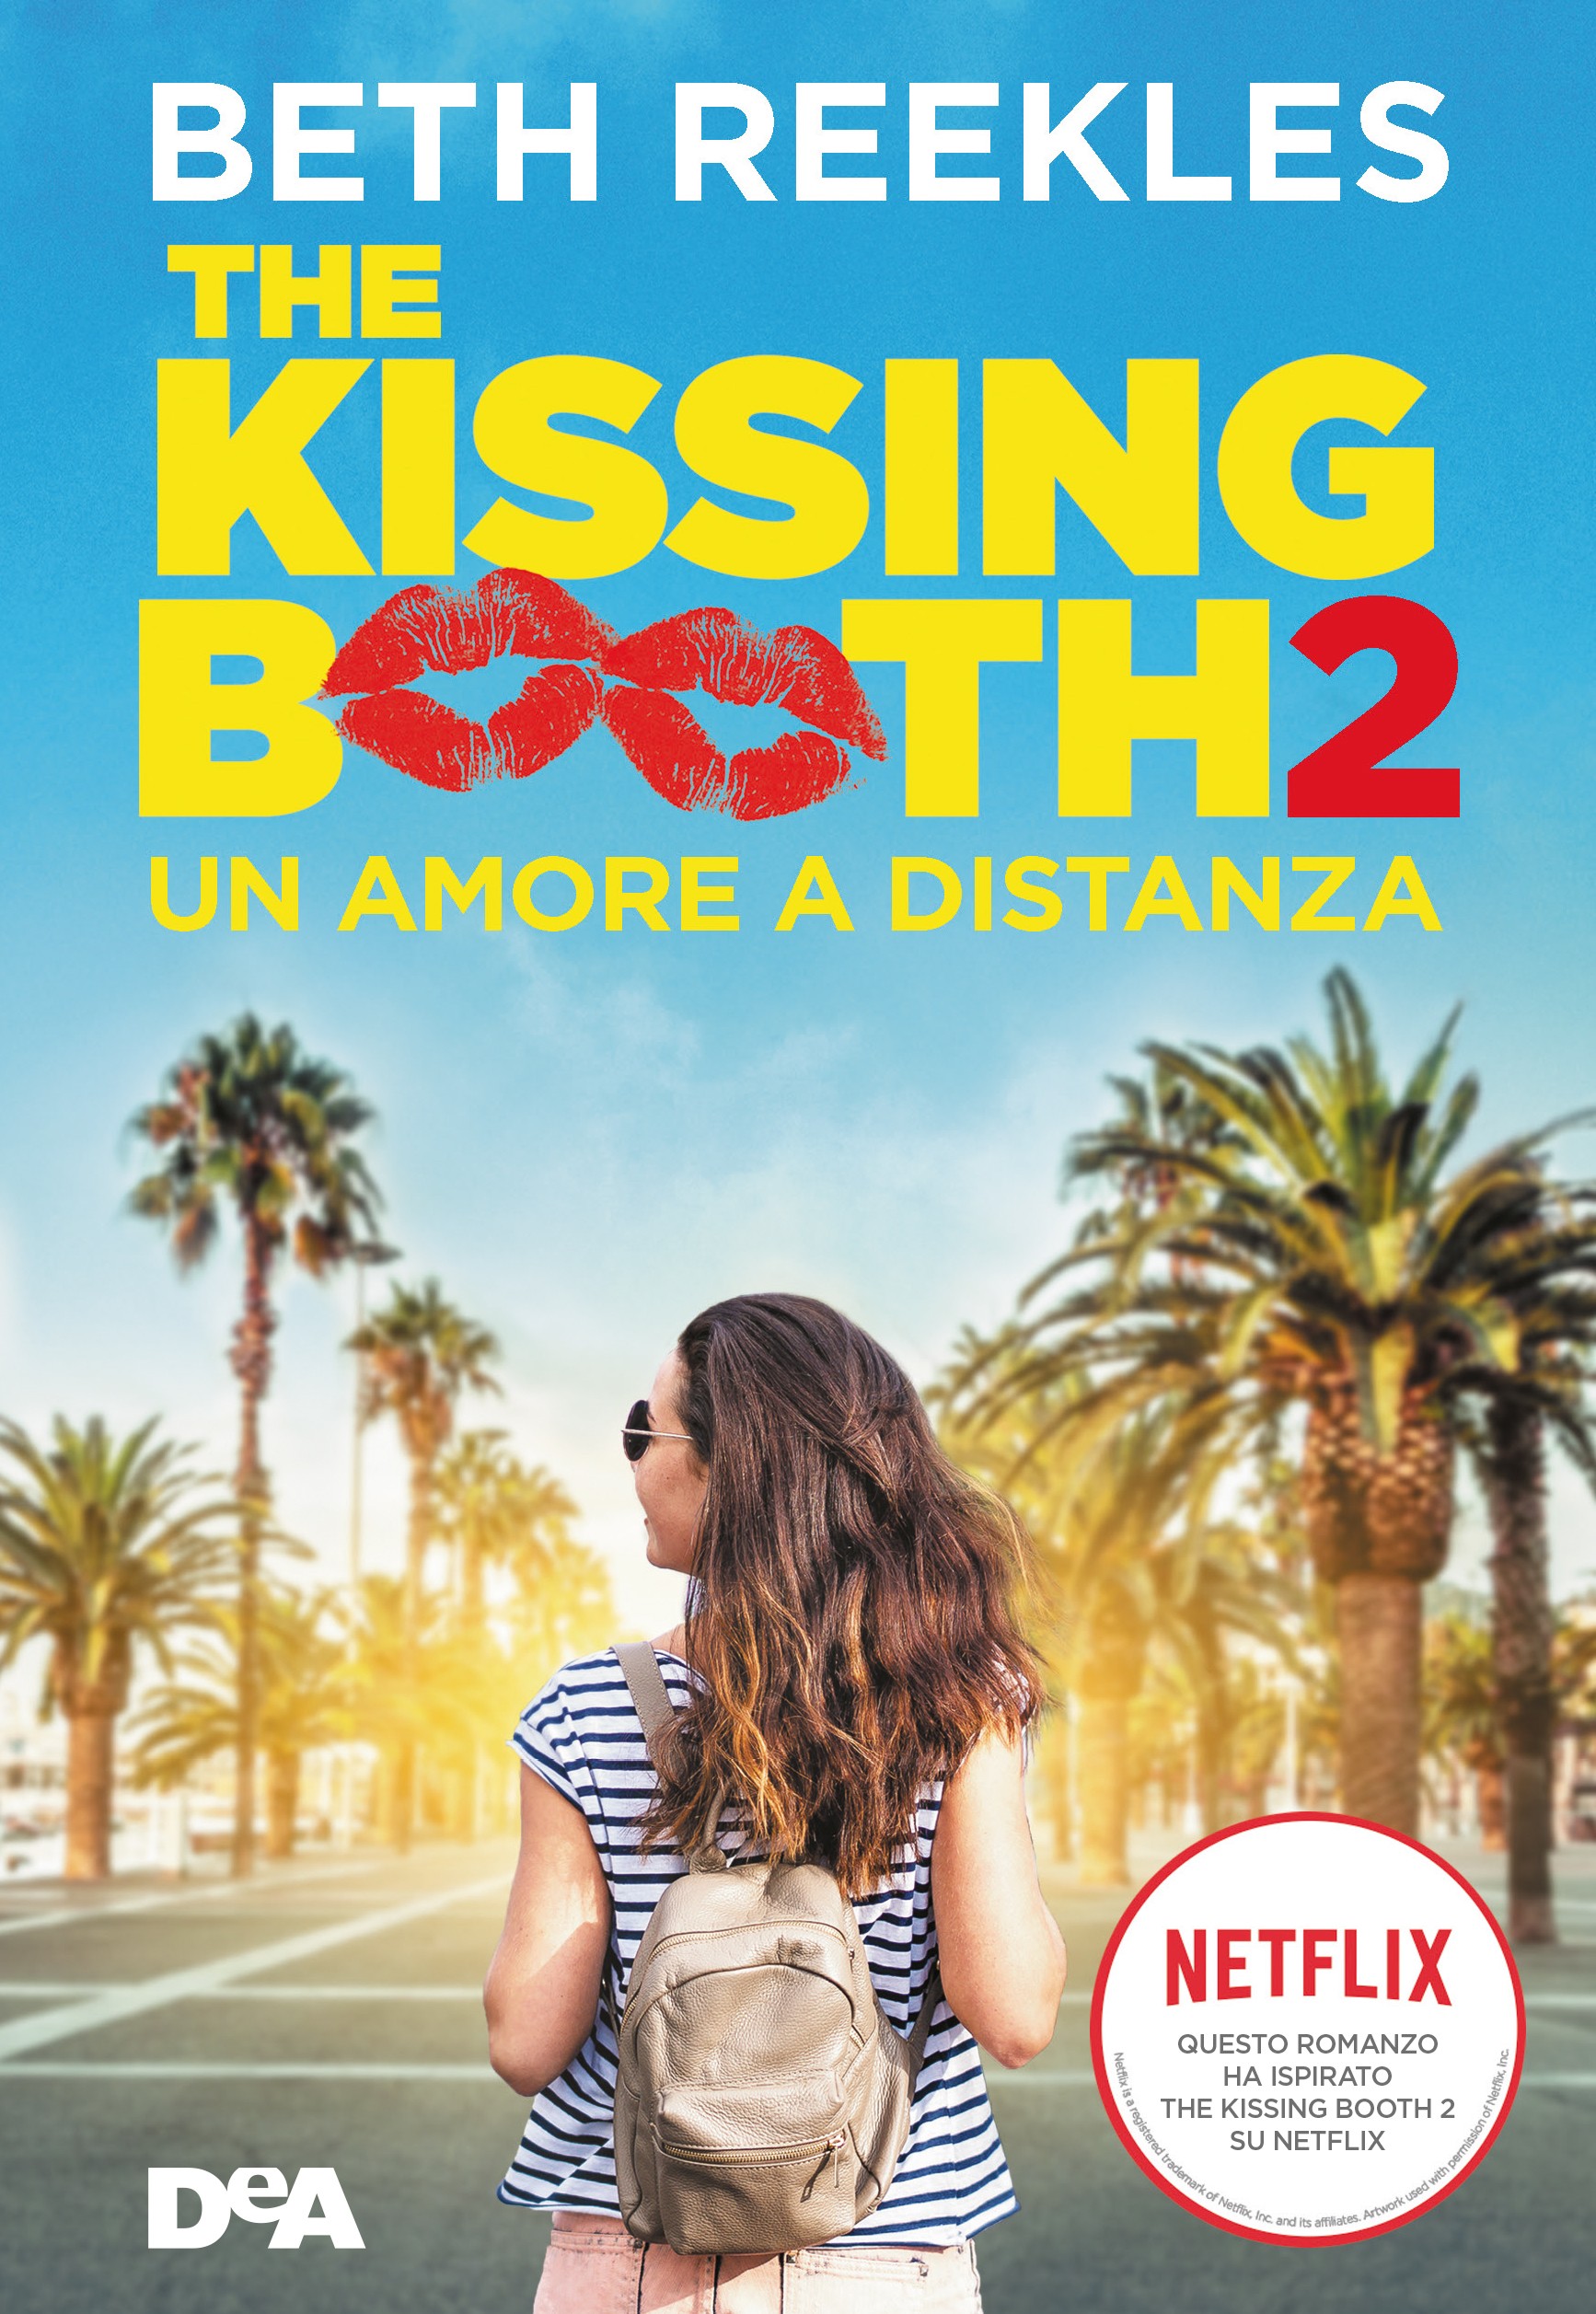 The kissing booth 2 - Librerie.coop